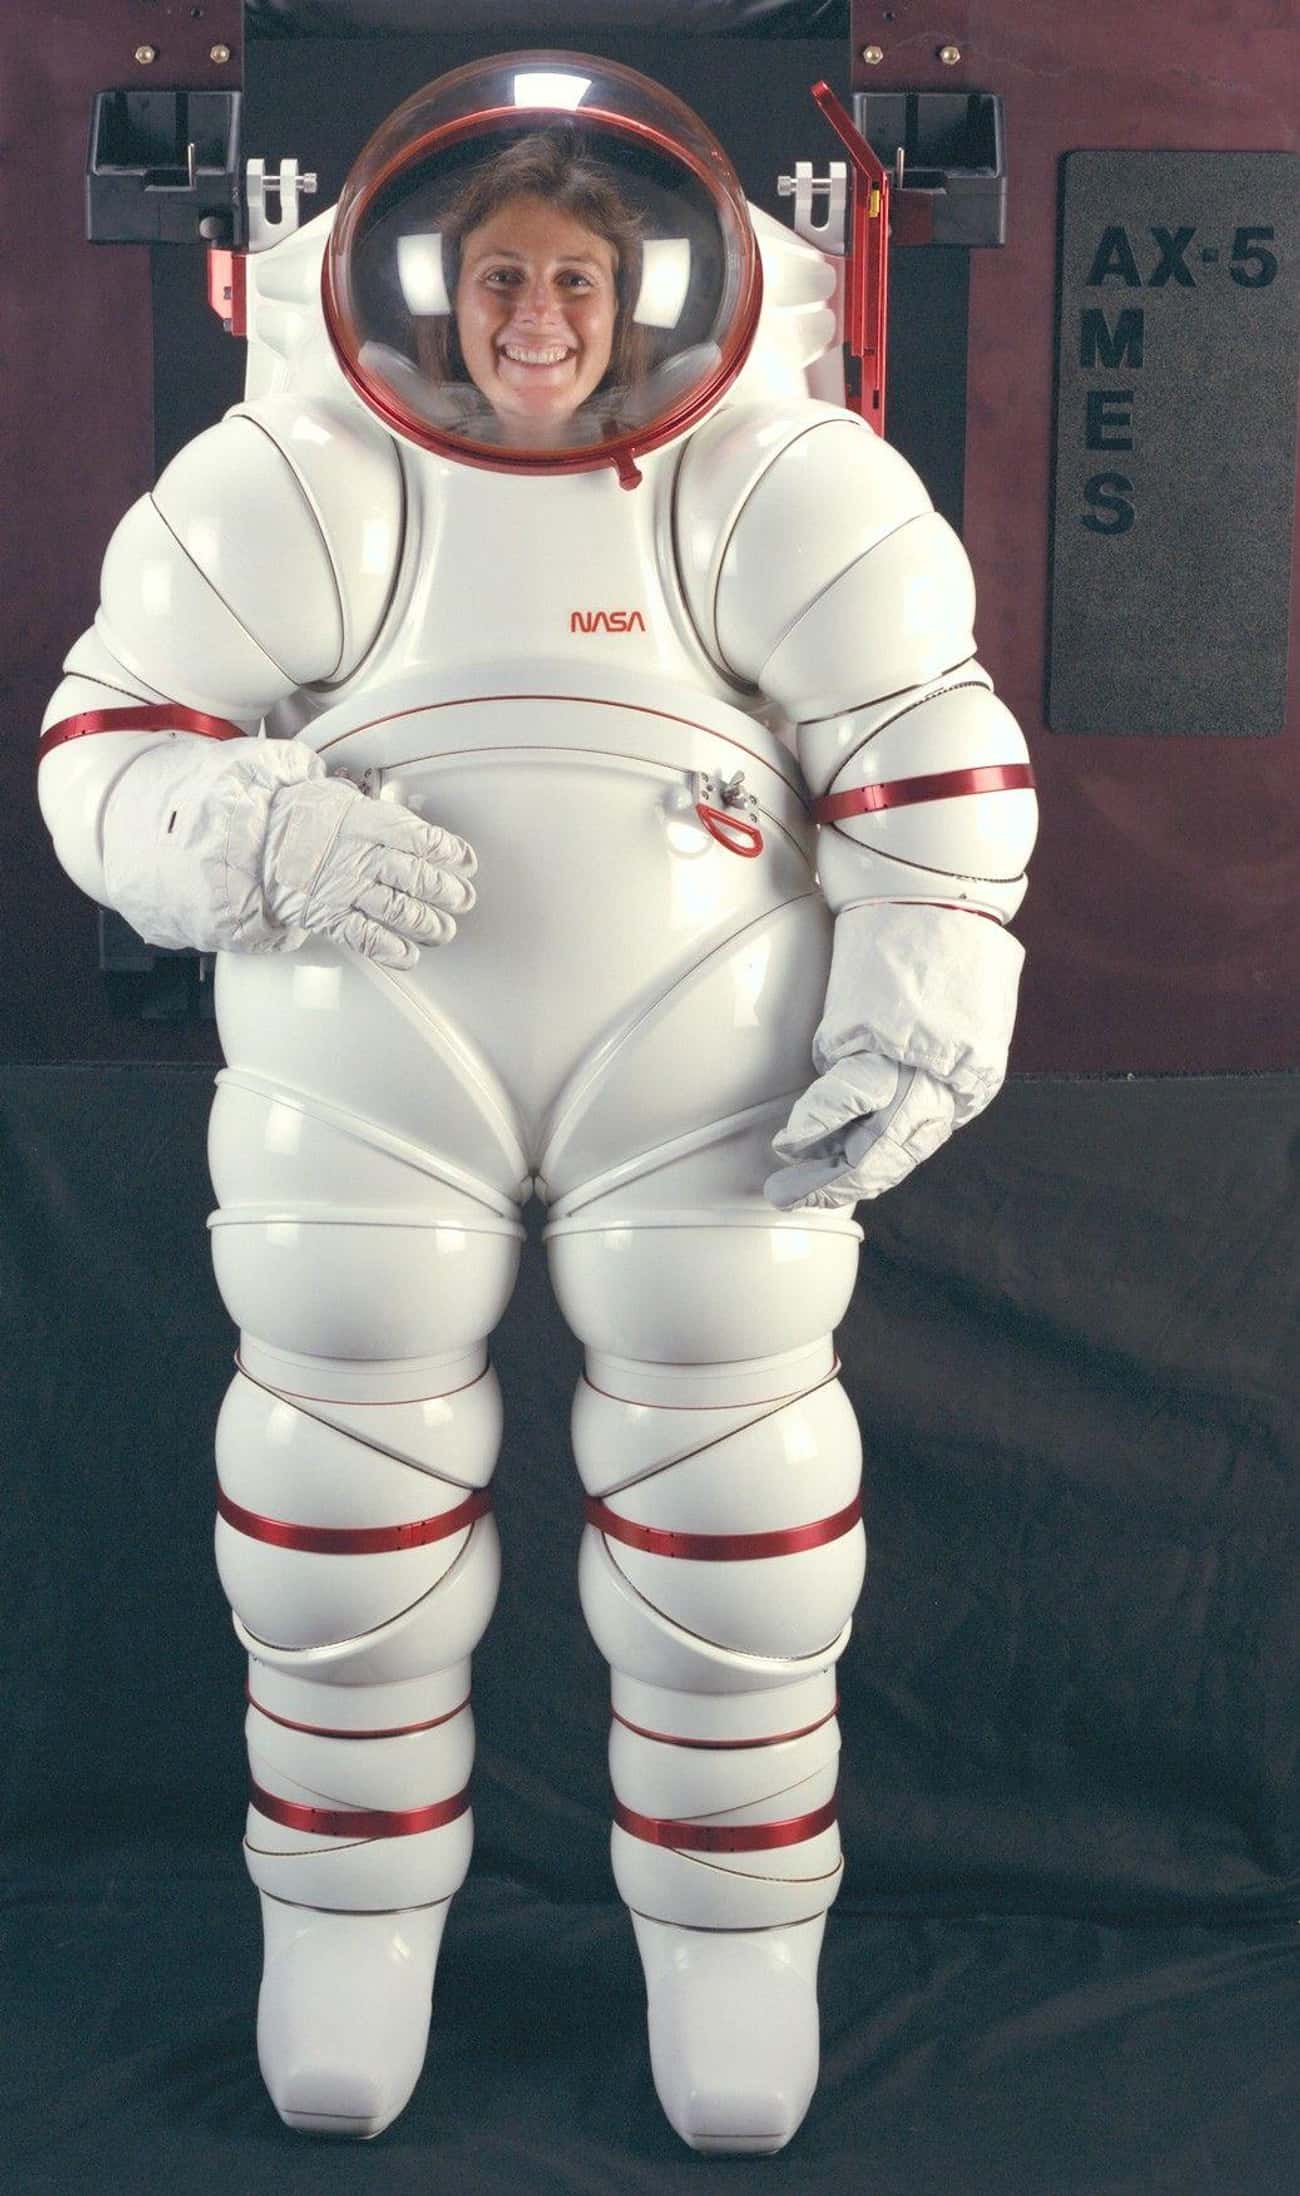 1988: AX-5 Hard-Shell Space Suit, United States